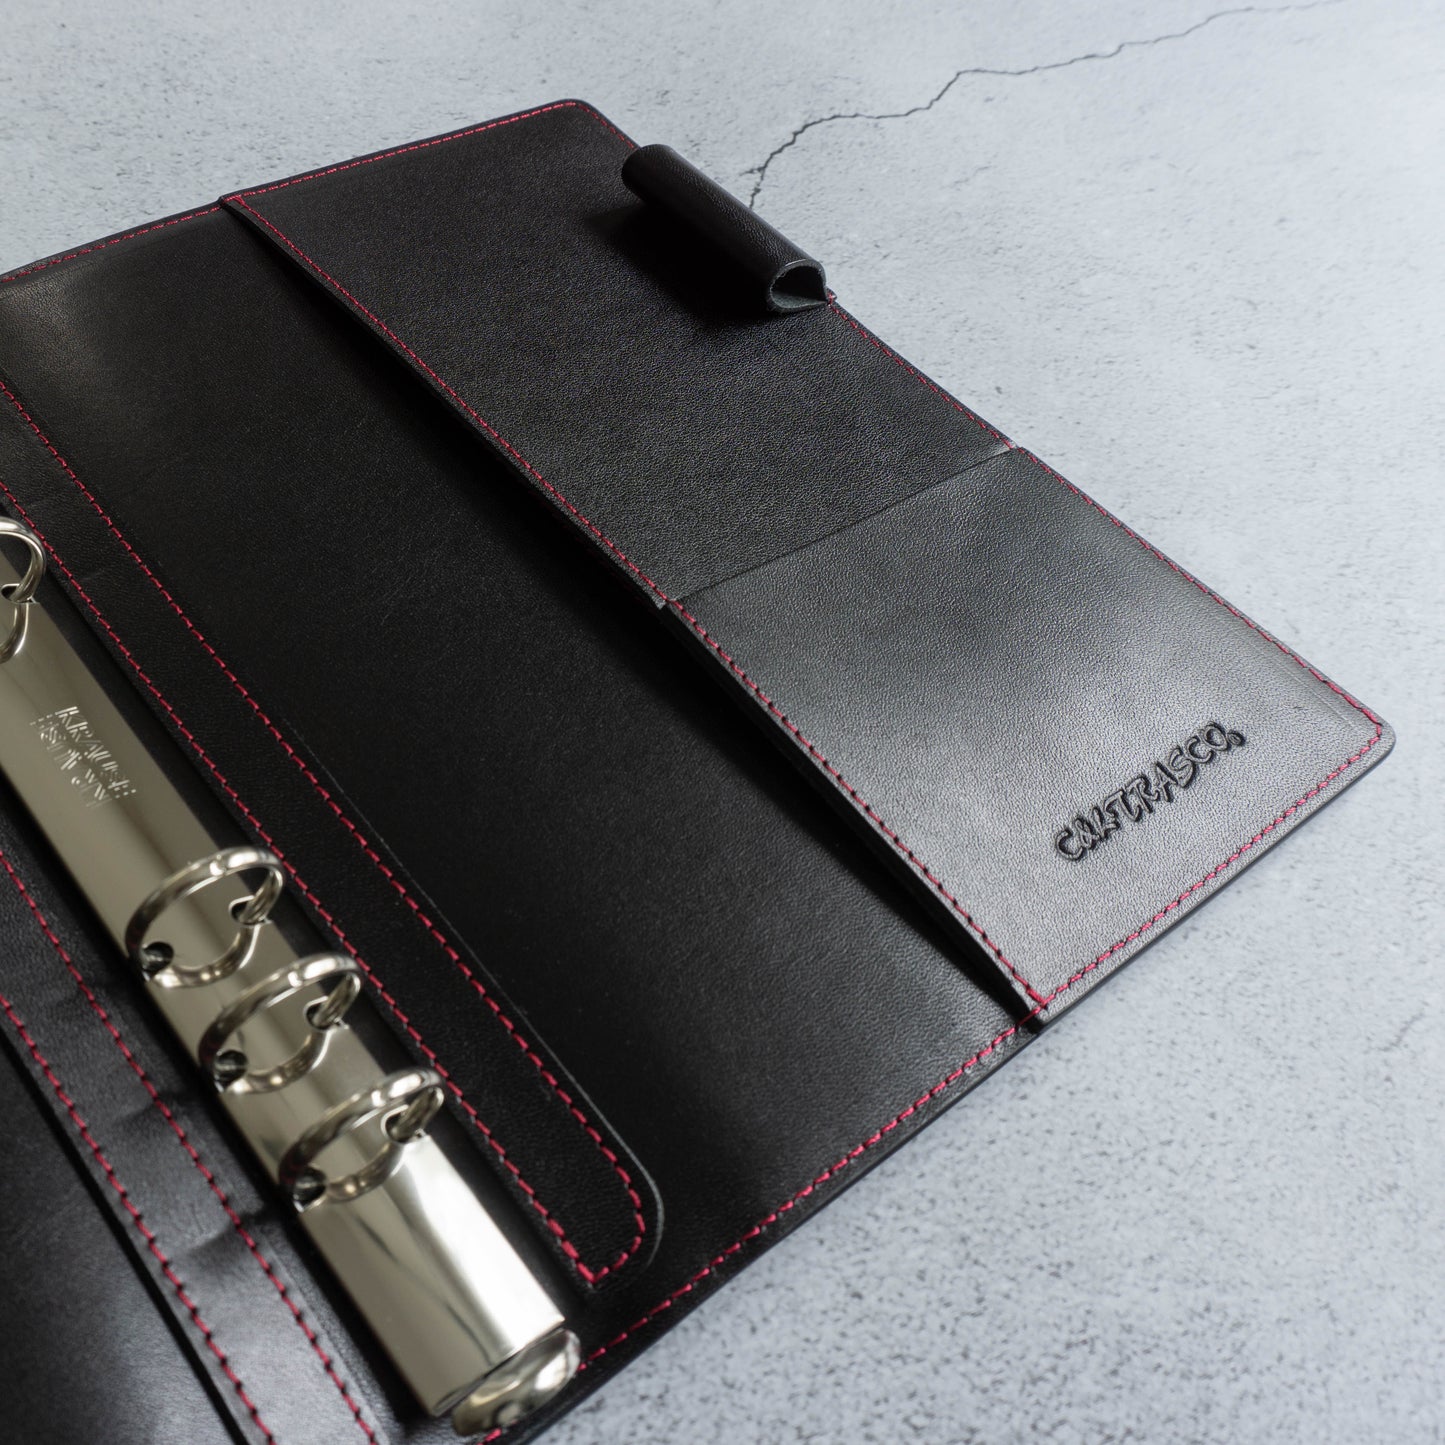 C&L TRASCO ≪CP Series≫ Personal Planner Binder Cover A5 Size 20mm 6 rings binder Genuine Leather (Carbon Pattern Leather x Tochigi Leather)